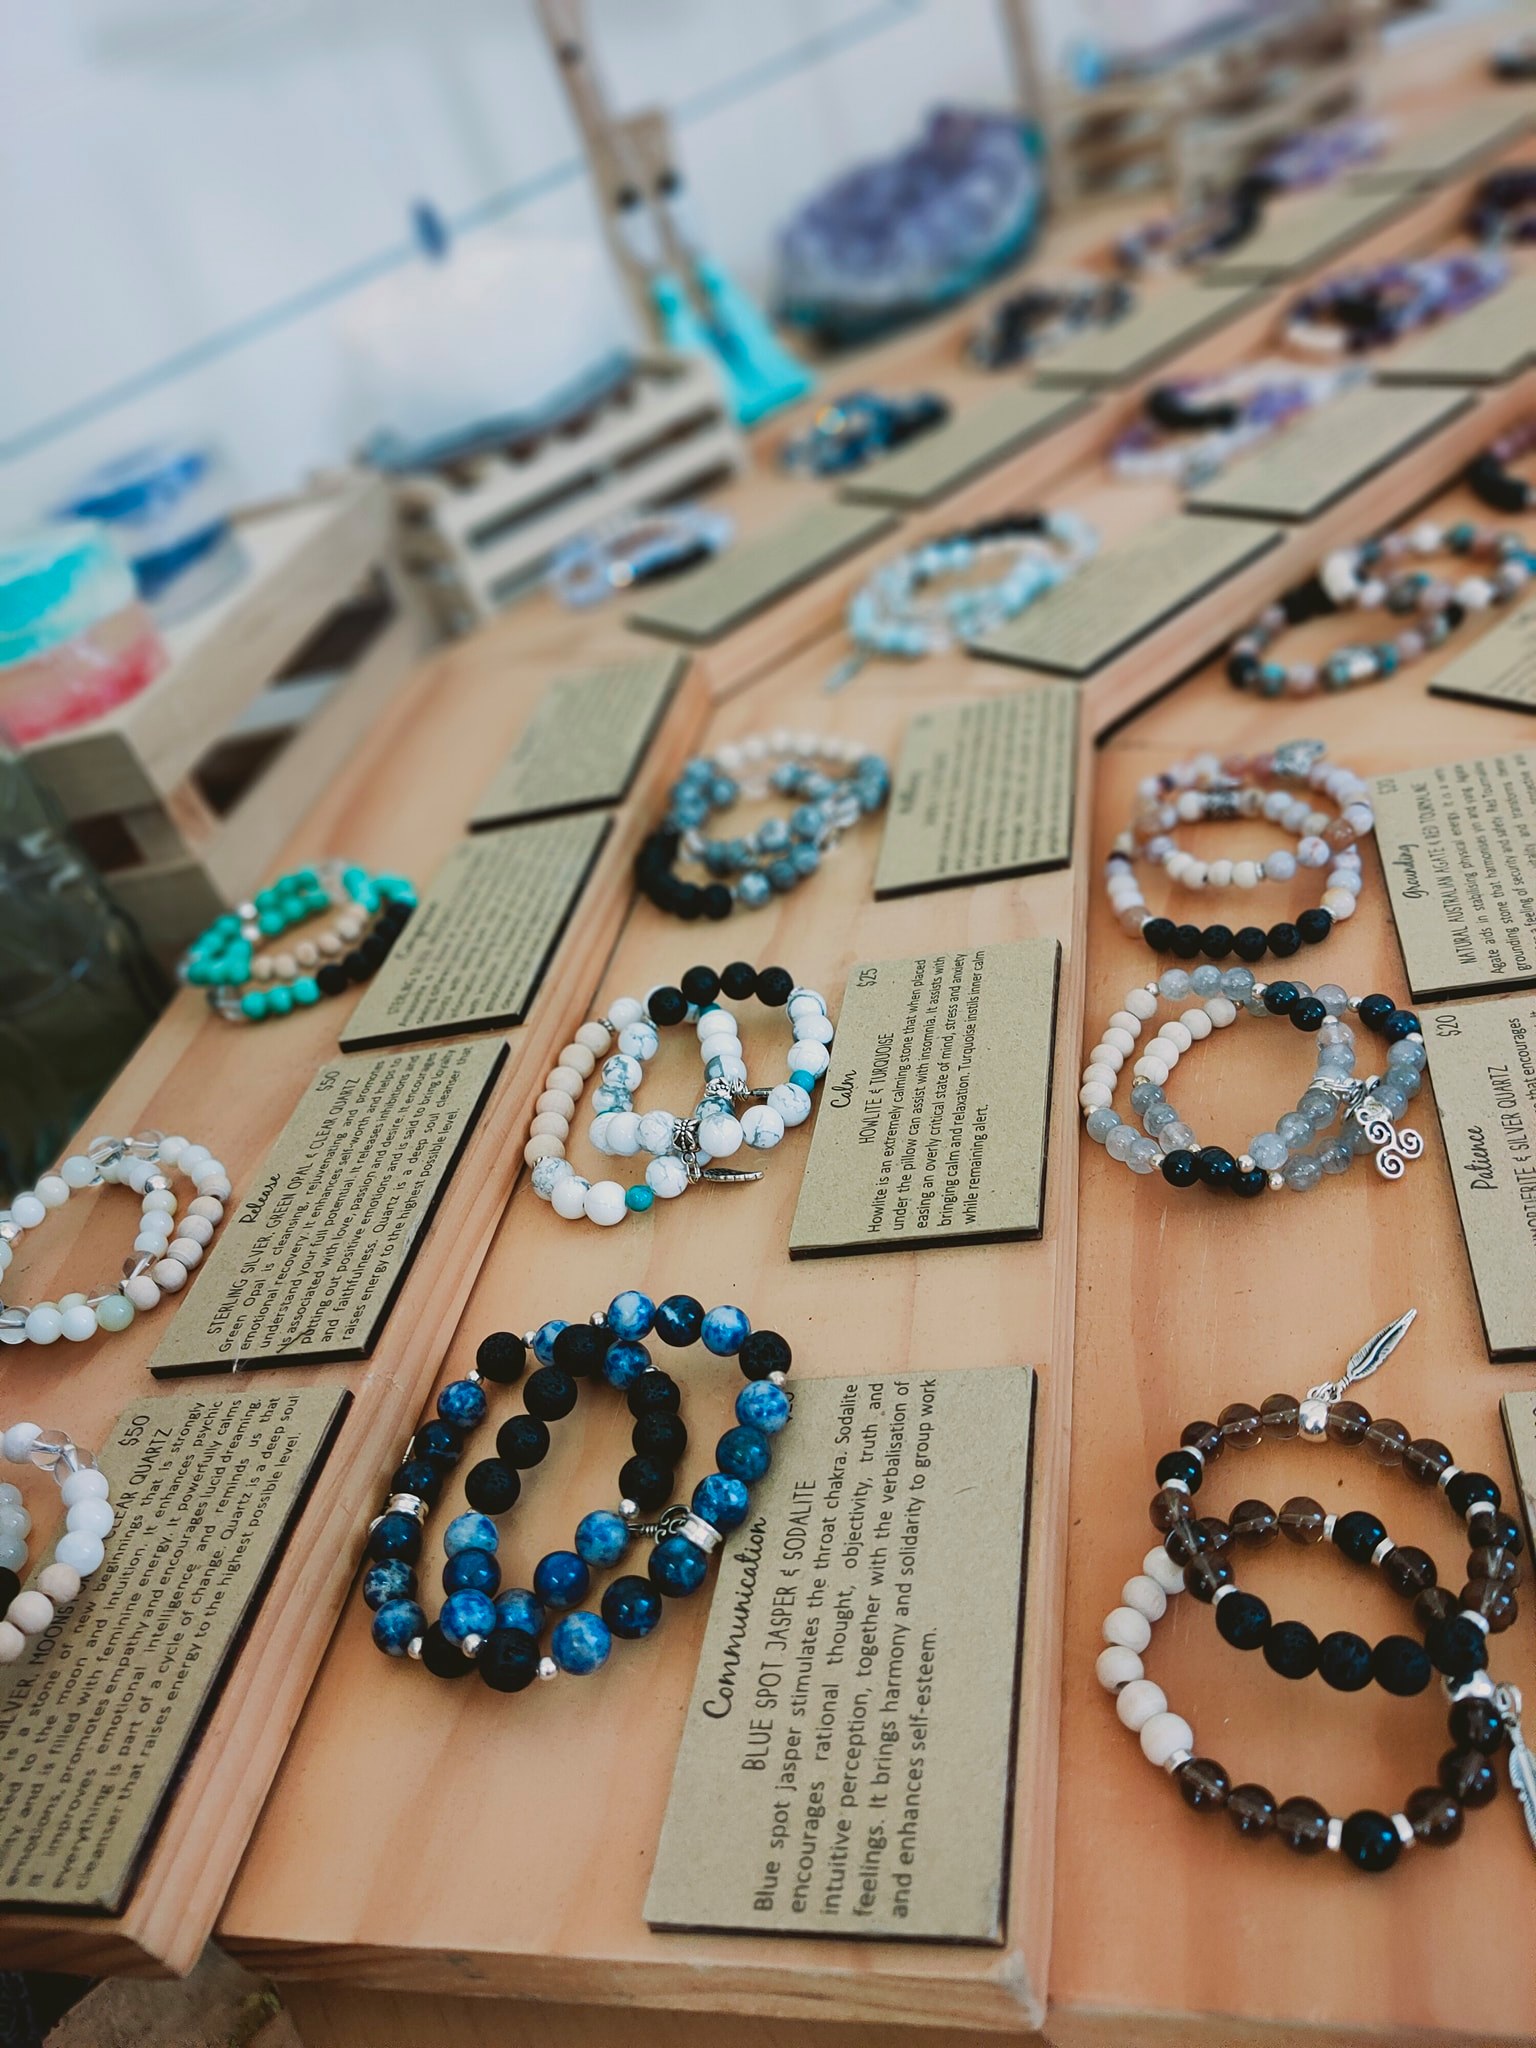 Bracelet making classes at The Soul Nook Collective or you can buy one from the Khari Collection